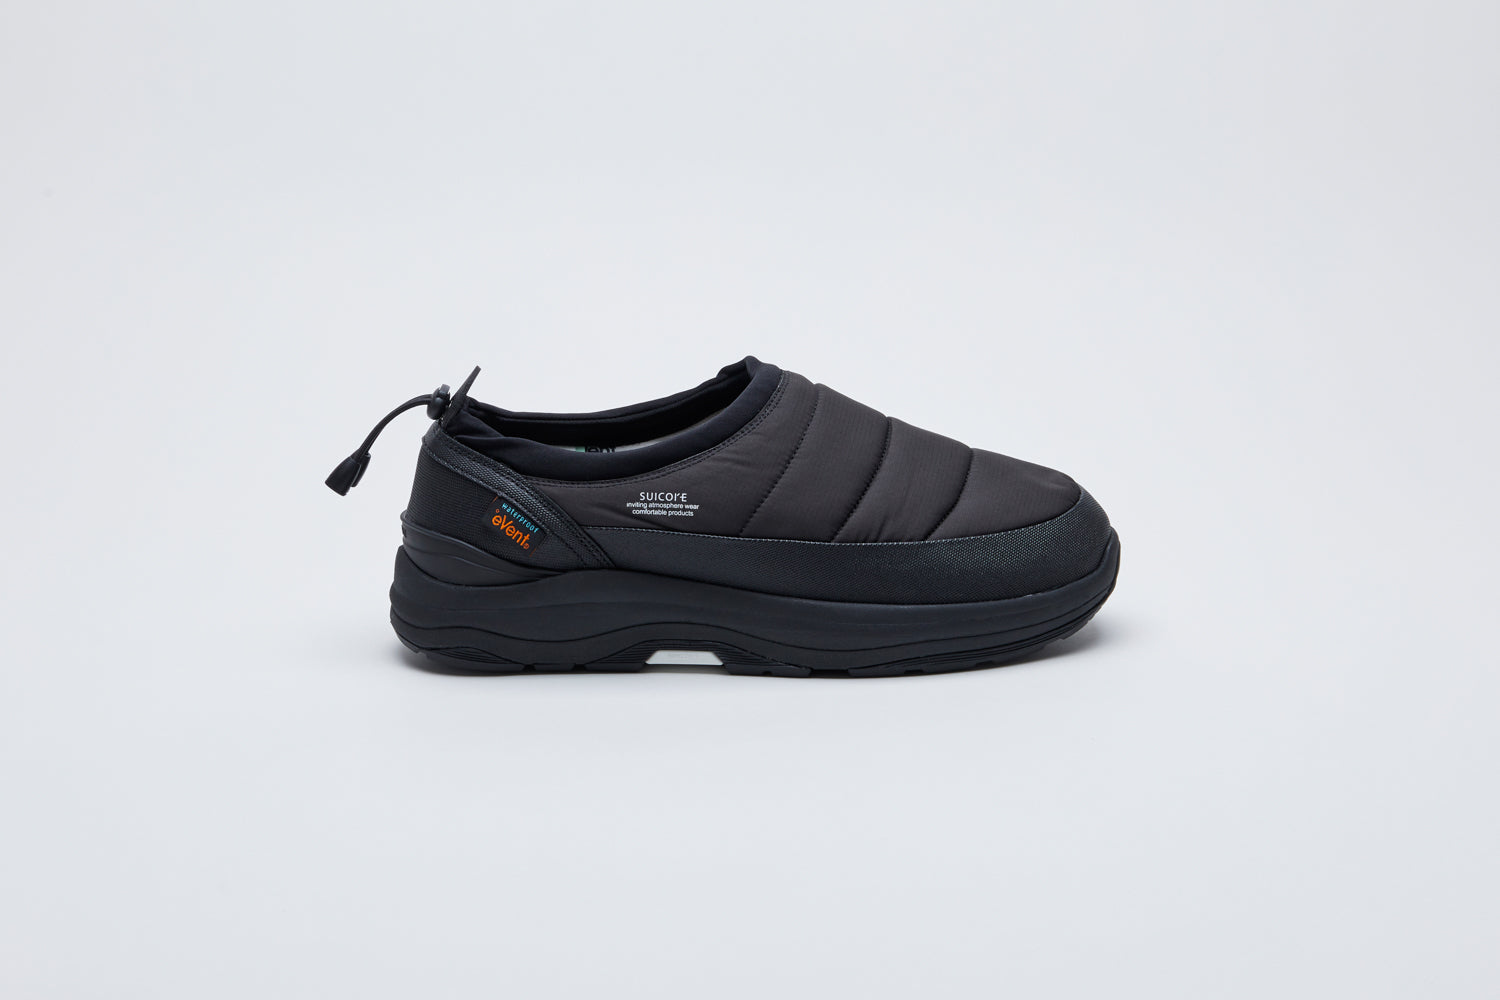 SUICOKE PEPPER-evab low top ankle boots with black nylon upper and running sole with adjustable toggle cord closure. From Fall/Winter 2021 collection on SUICOKE Official US & Canada Webstore.